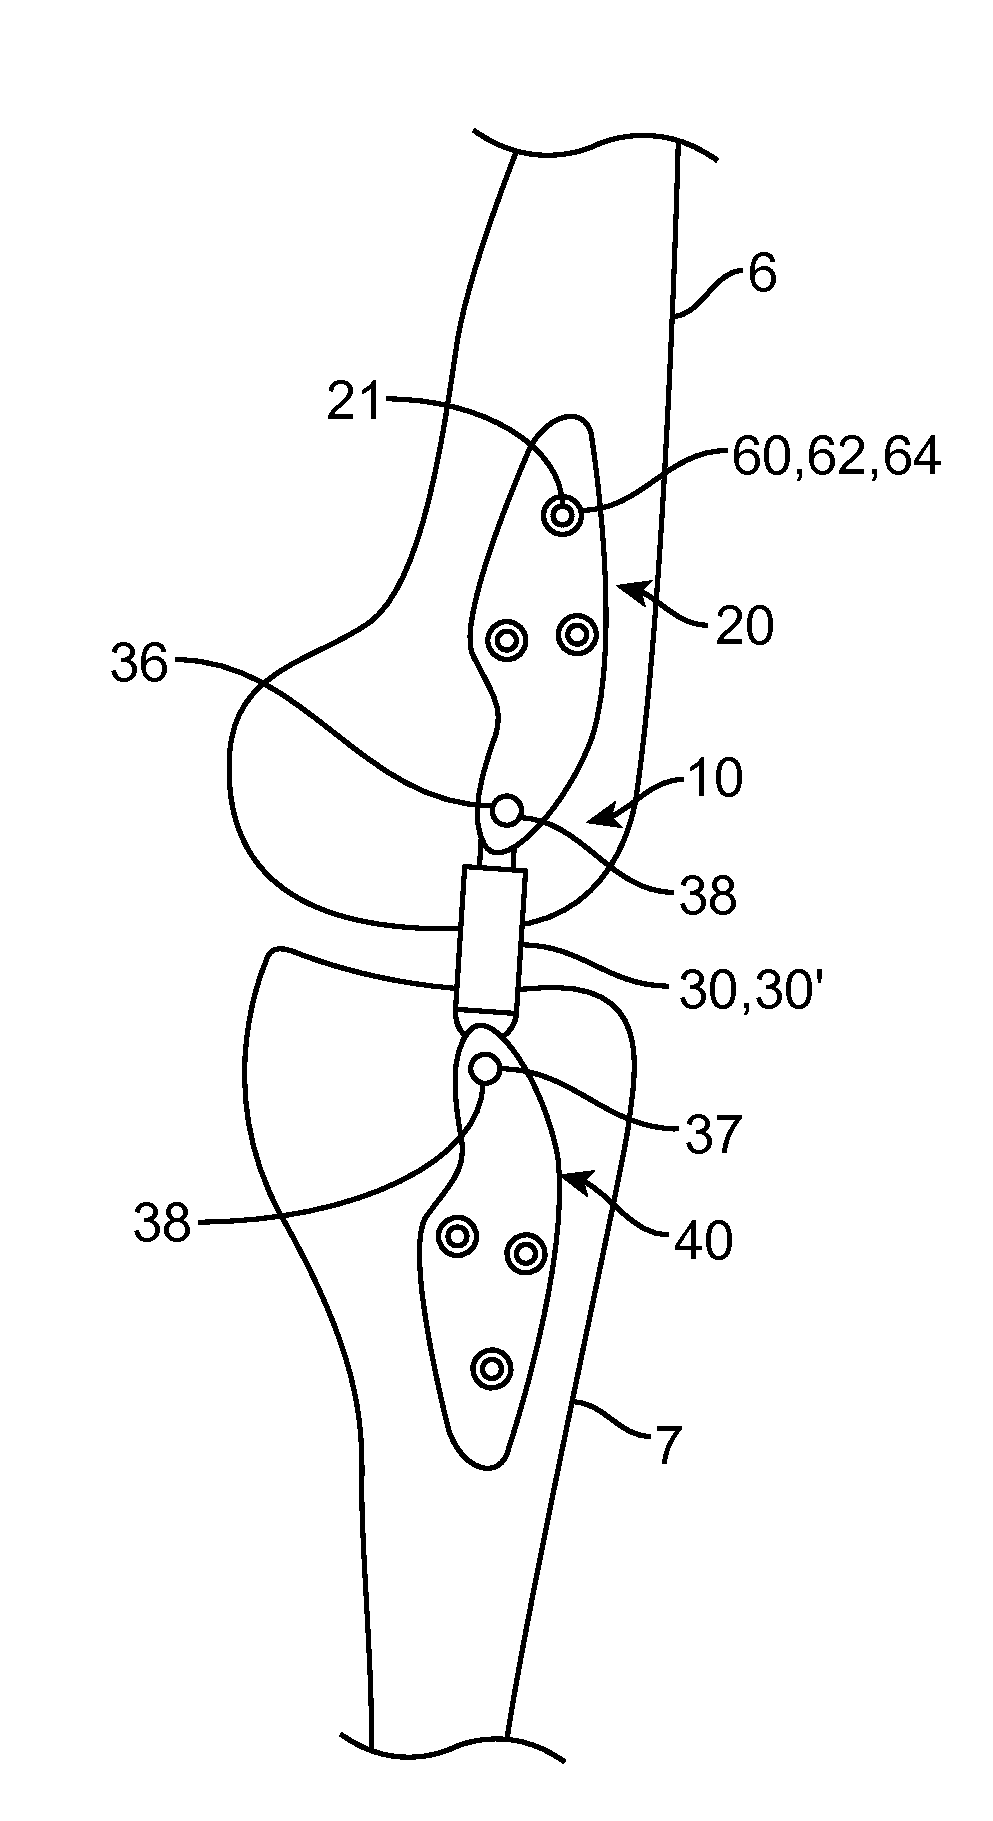 Extra-Articular Implantable Mechanical Energy Absorbing Assemblies and Methods